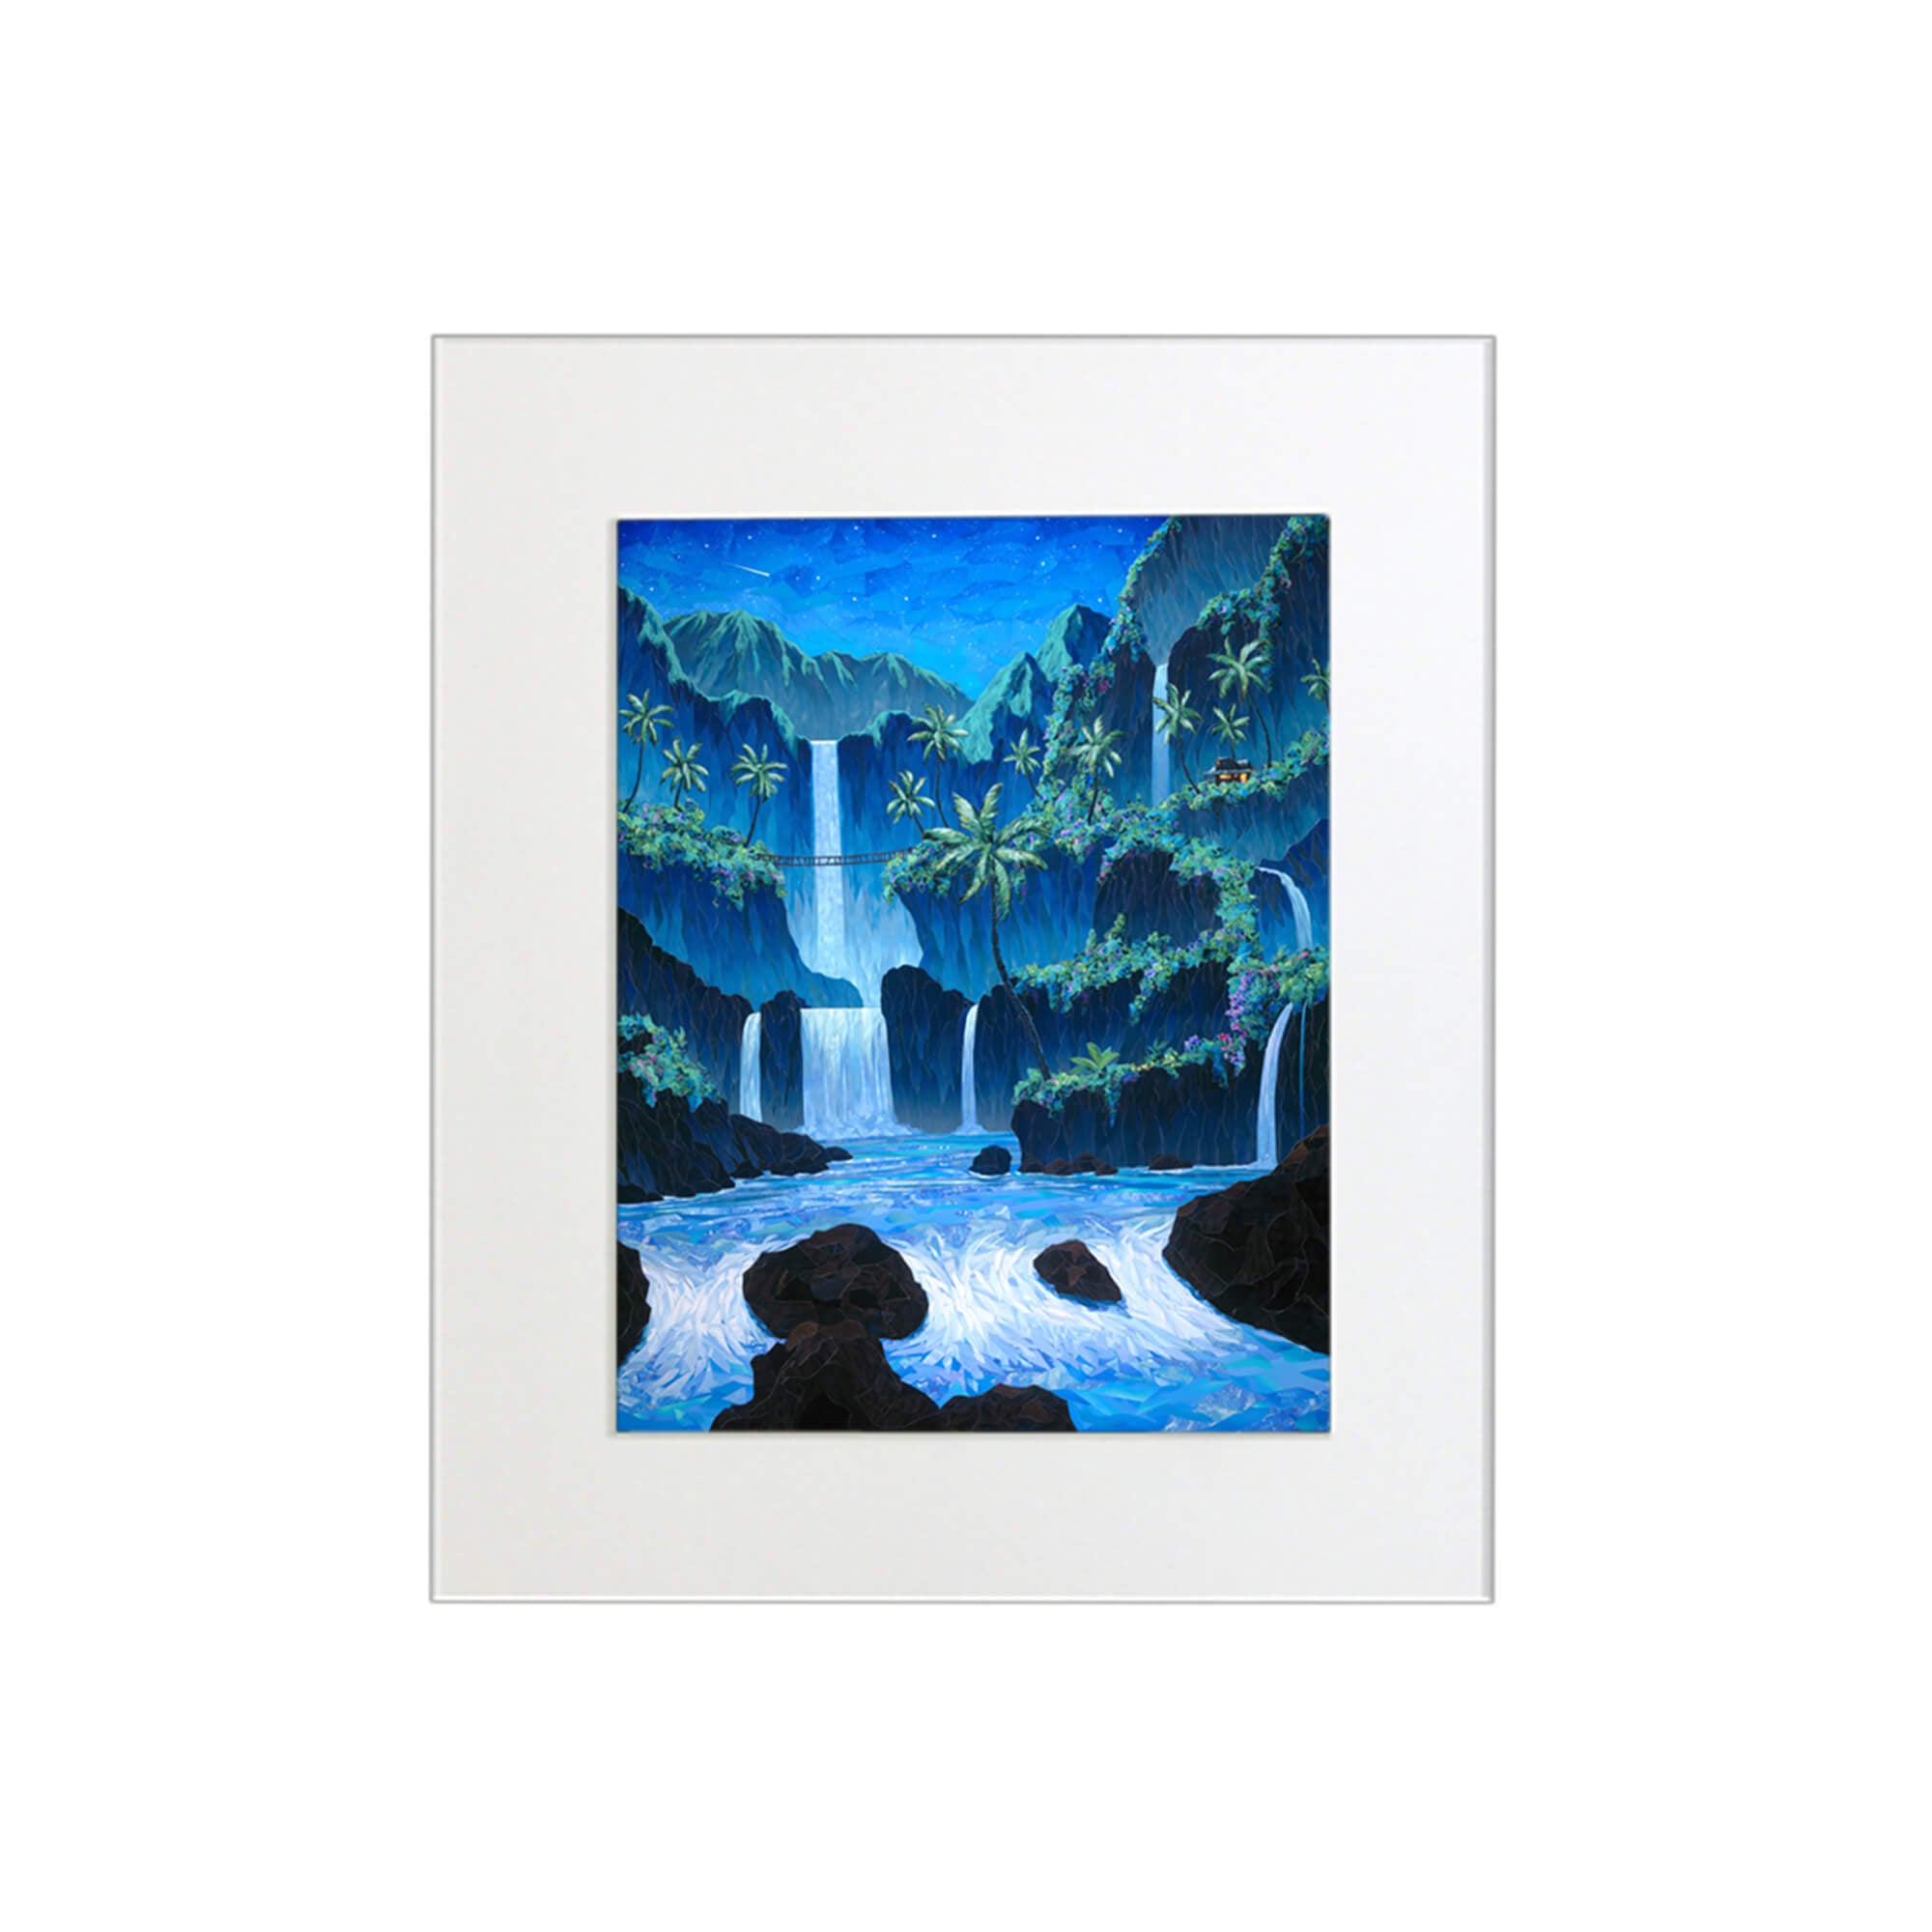 A matted art print featuring a collage of a dreamy tropical paradise with several waterfalls, surrounded by Mountains and colorful tropical flowers by Hawaii artist Patrick Parker